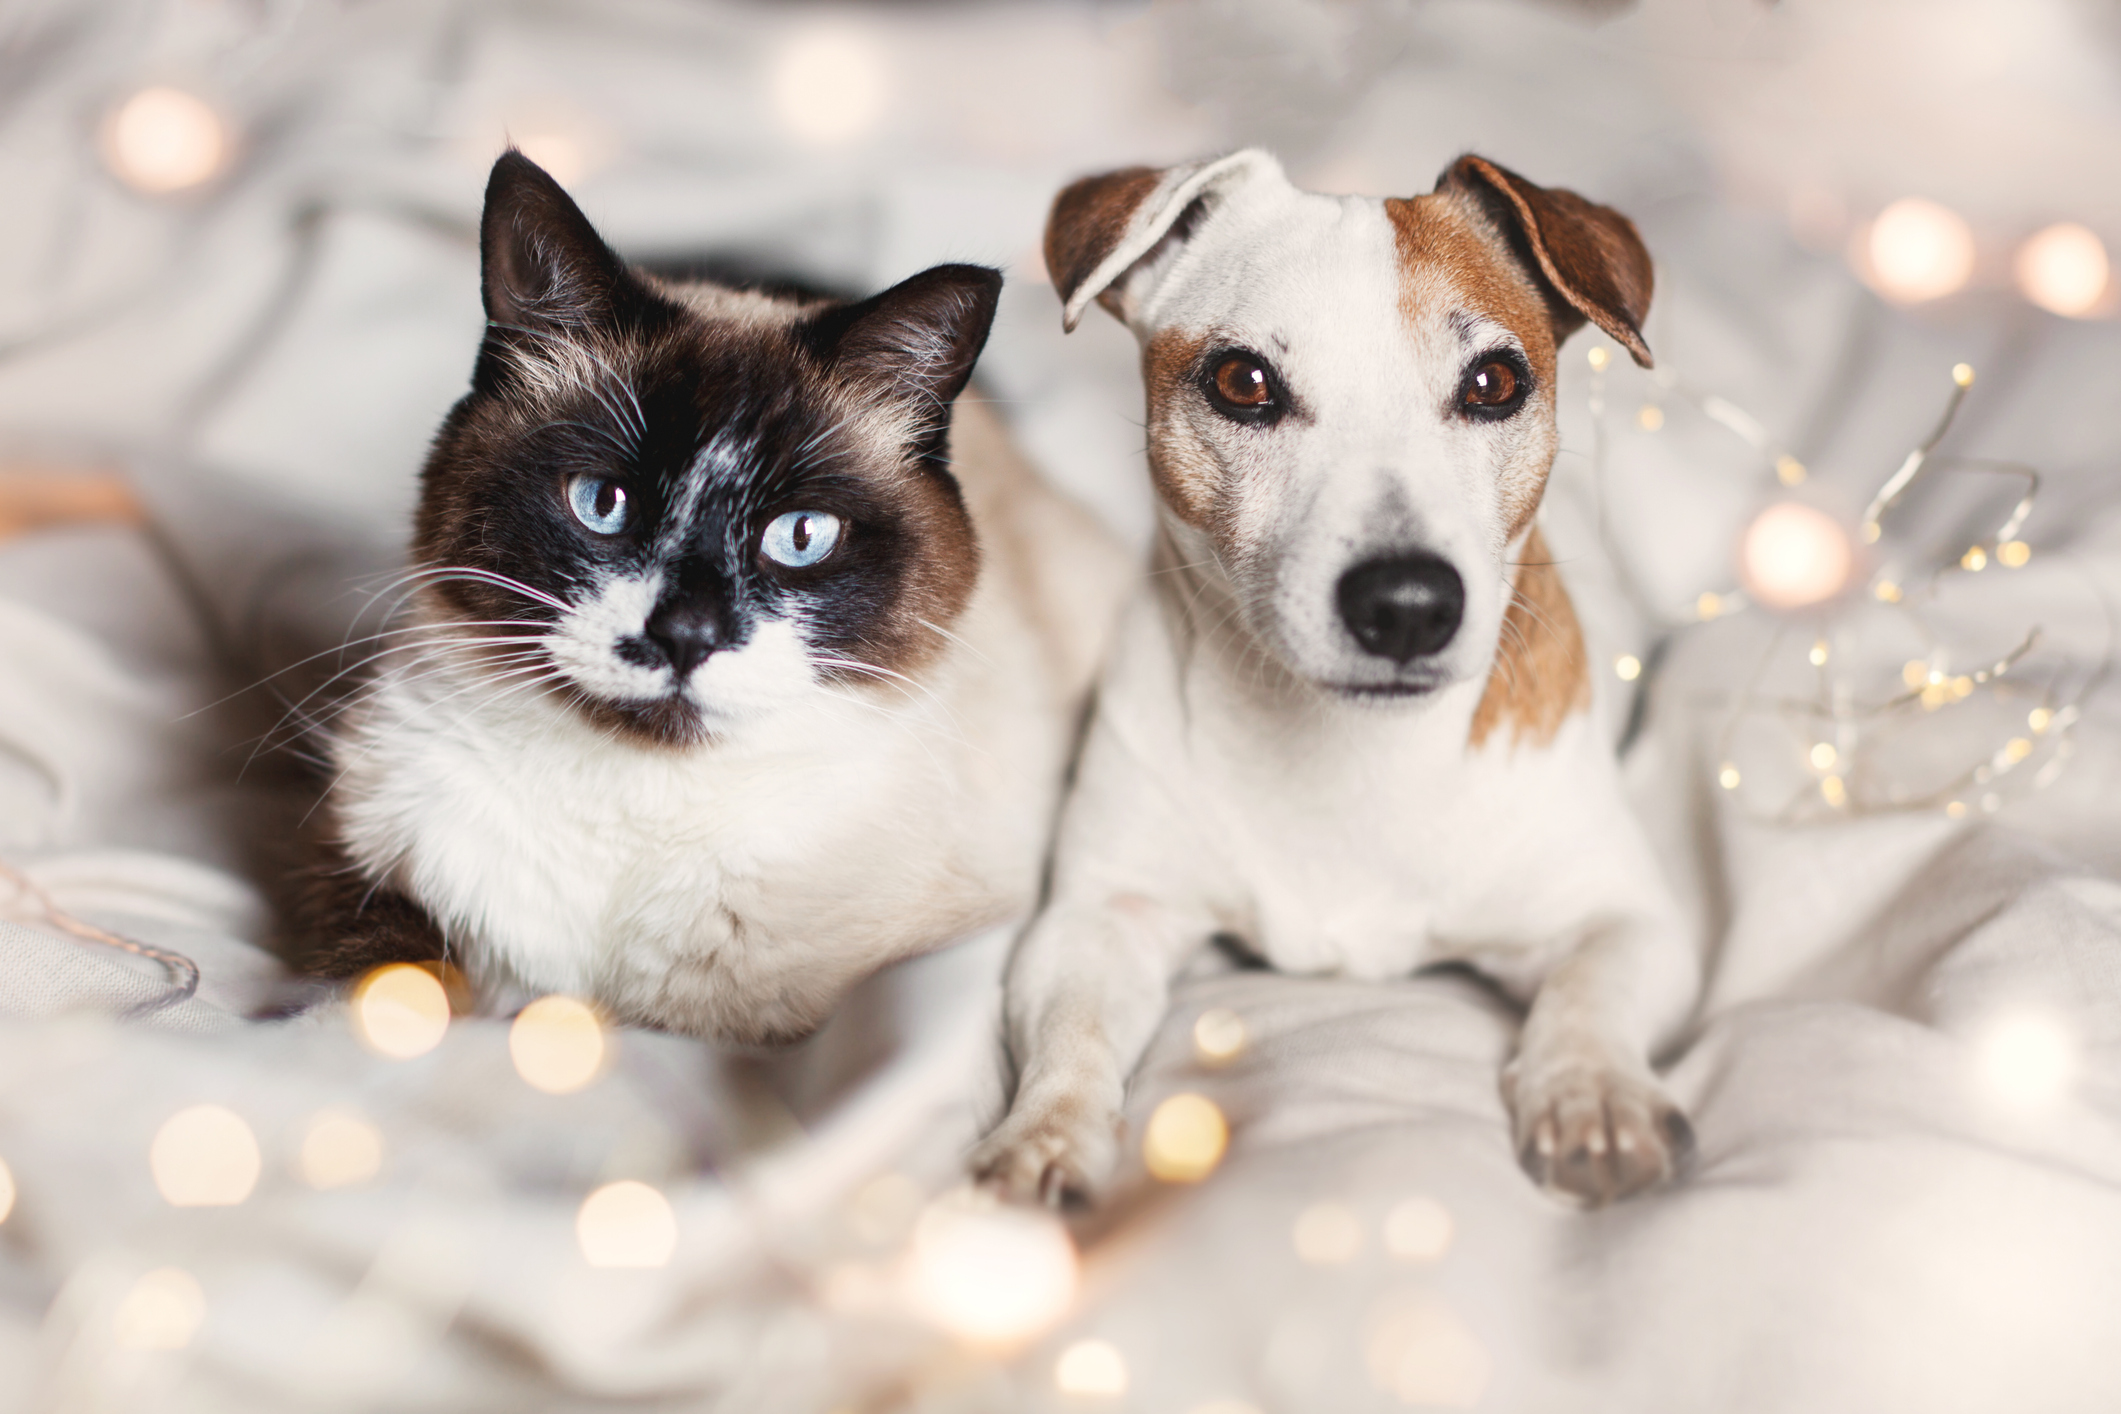  Siamese cat and Jack Russell Terrier on a blanket covered with sparkling New Year’s decorations.